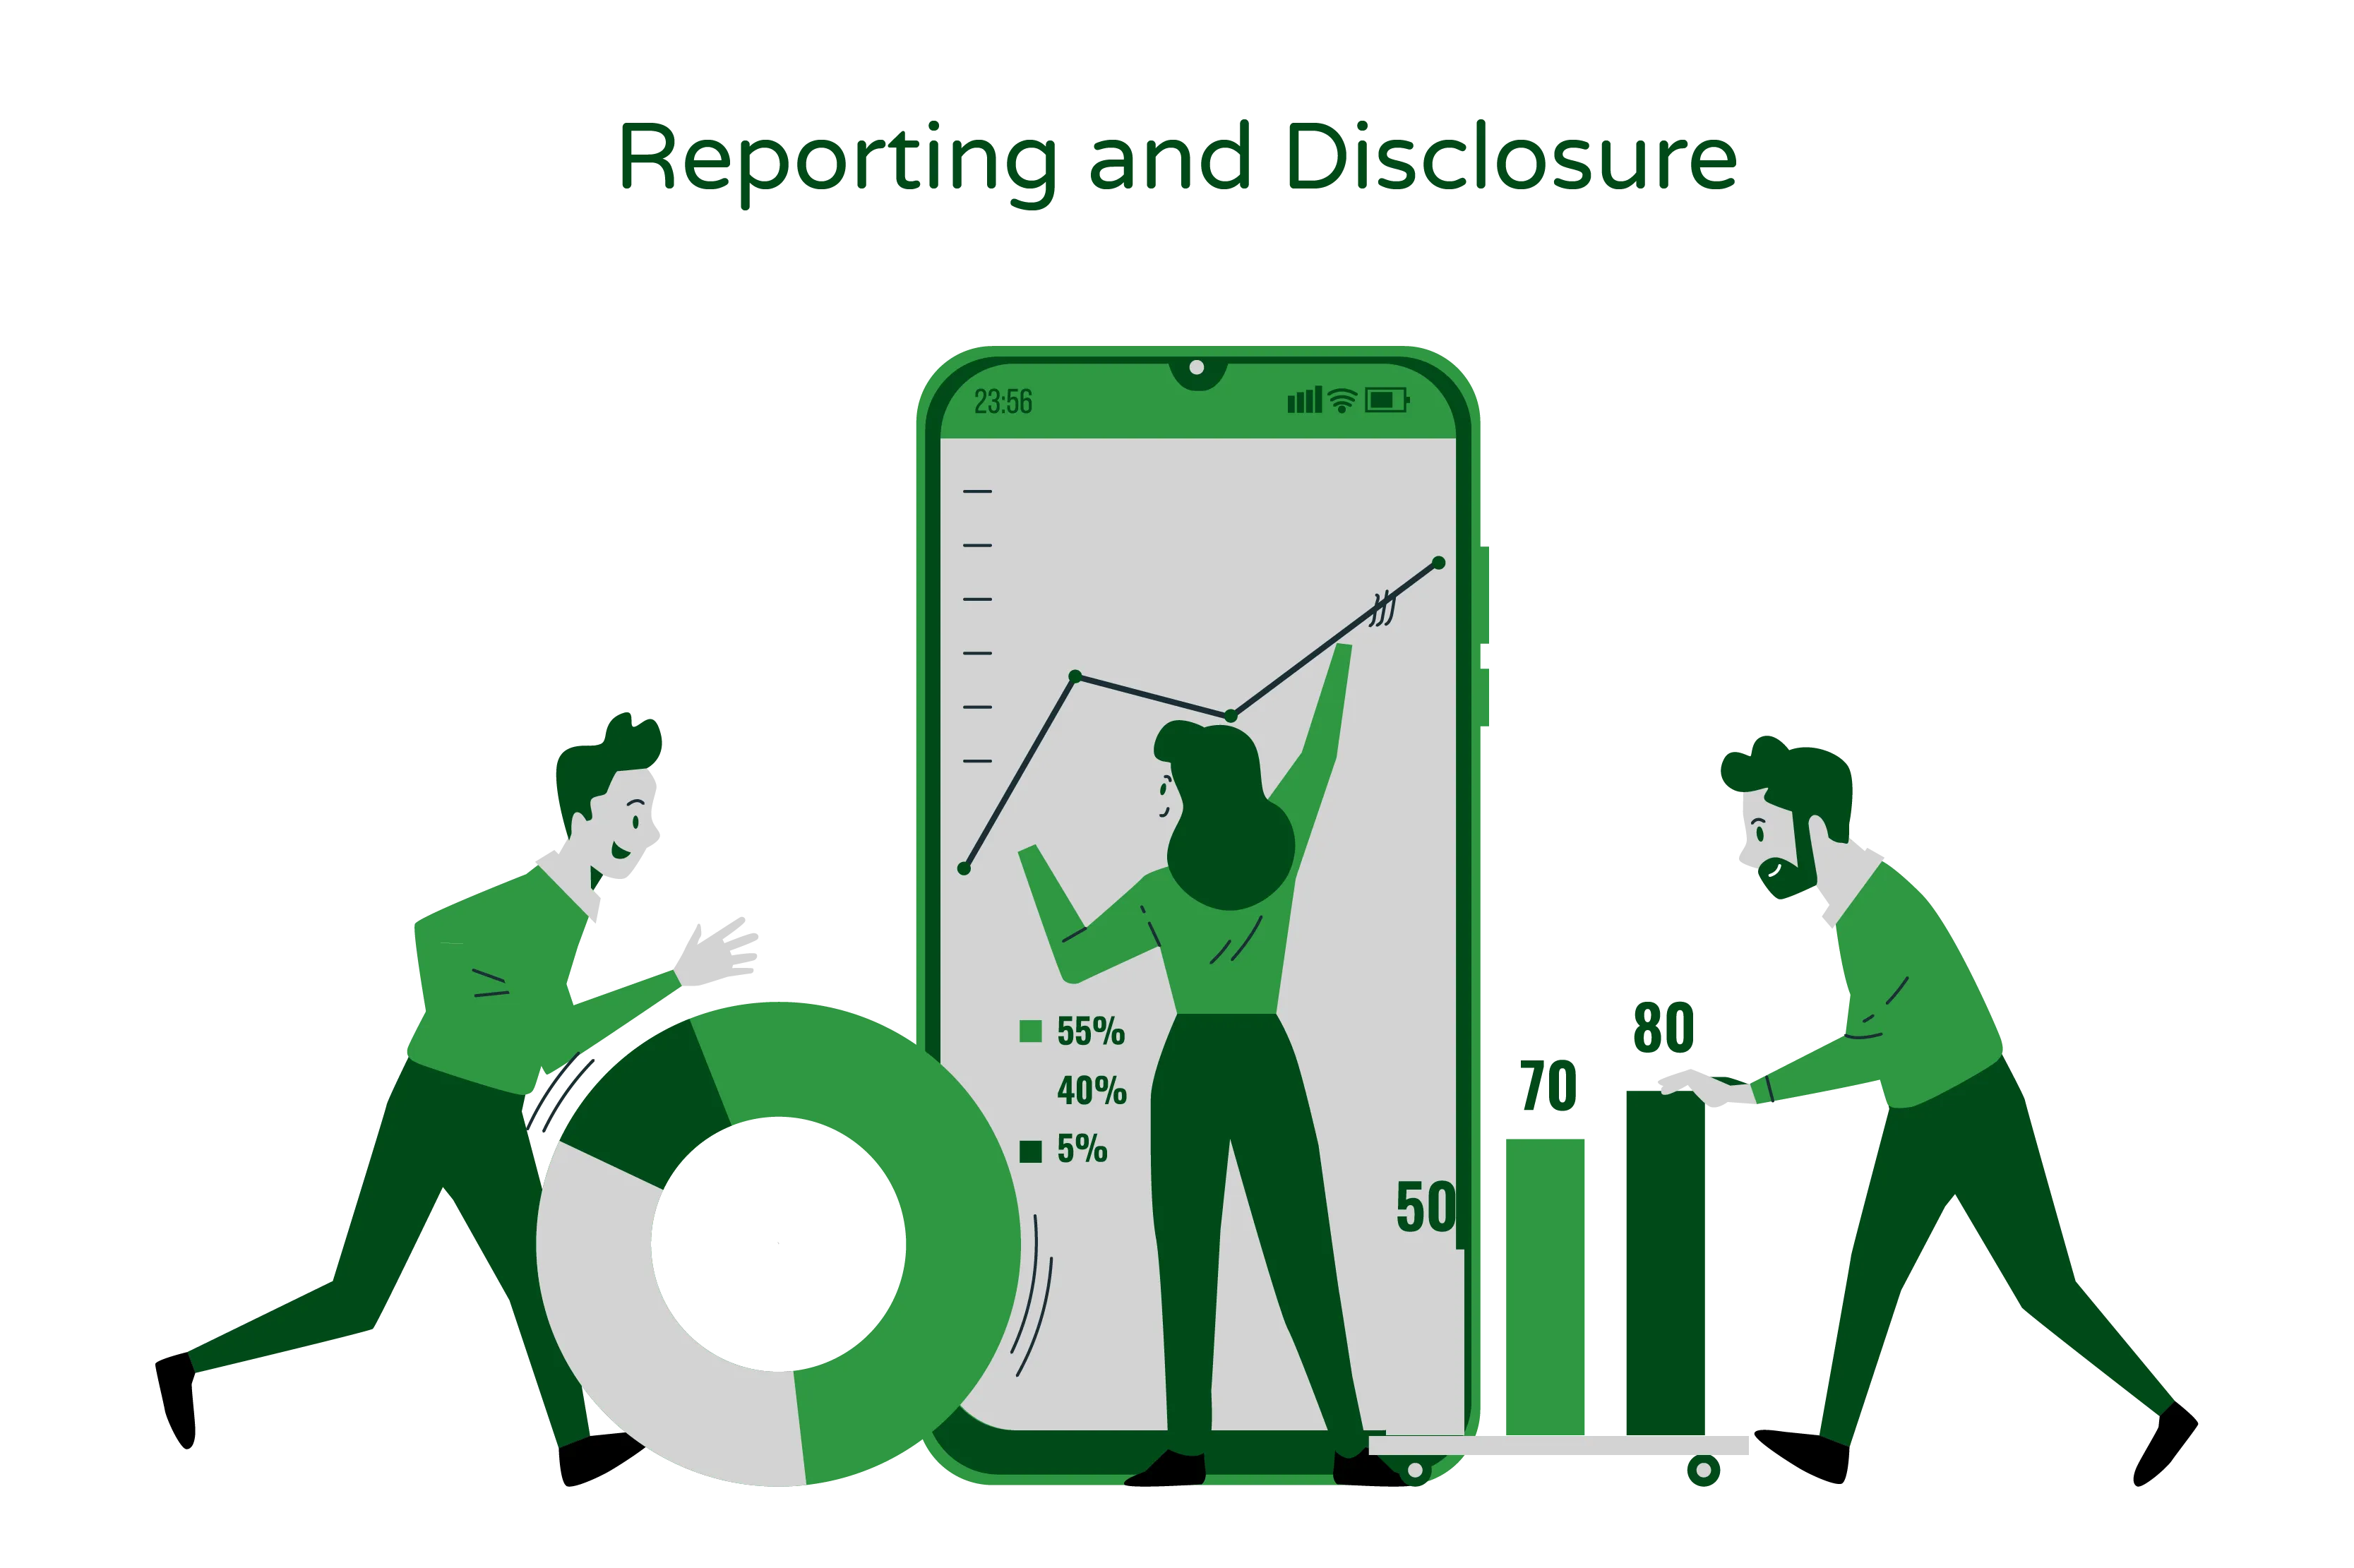 Illustration titled 'Reporting and Disclosure' features three individuals using a large phone screen displaying graphs and reports, representing the process of reporting and disclosing environmental data."  The illustration visually represents the concept of reporting and disclosure, as indicated by the title. The three individuals engaging with the phone screen symbolize the active involvement of people in the process of reporting and disclosing data.  The central focus of the illustration is the large phone screen, which displays graphs and reports. This represents the visual representation and communication of environmental data, including carbon footprint and other Environmental, Social, and Governance (ESG) metrics.  The presence of the graphs signifies the measurement and representation of emissions and other relevant data. The screen emphasizes the use of technology in facilitating reporting and disclosure processes.  Overall, the 'Reporting and Disclosure' illustration visually represents the importance of accurate reporting and disclosure of environmental data, reflecting the need for transparency and accountability in addressing climate change and sustainability goals.